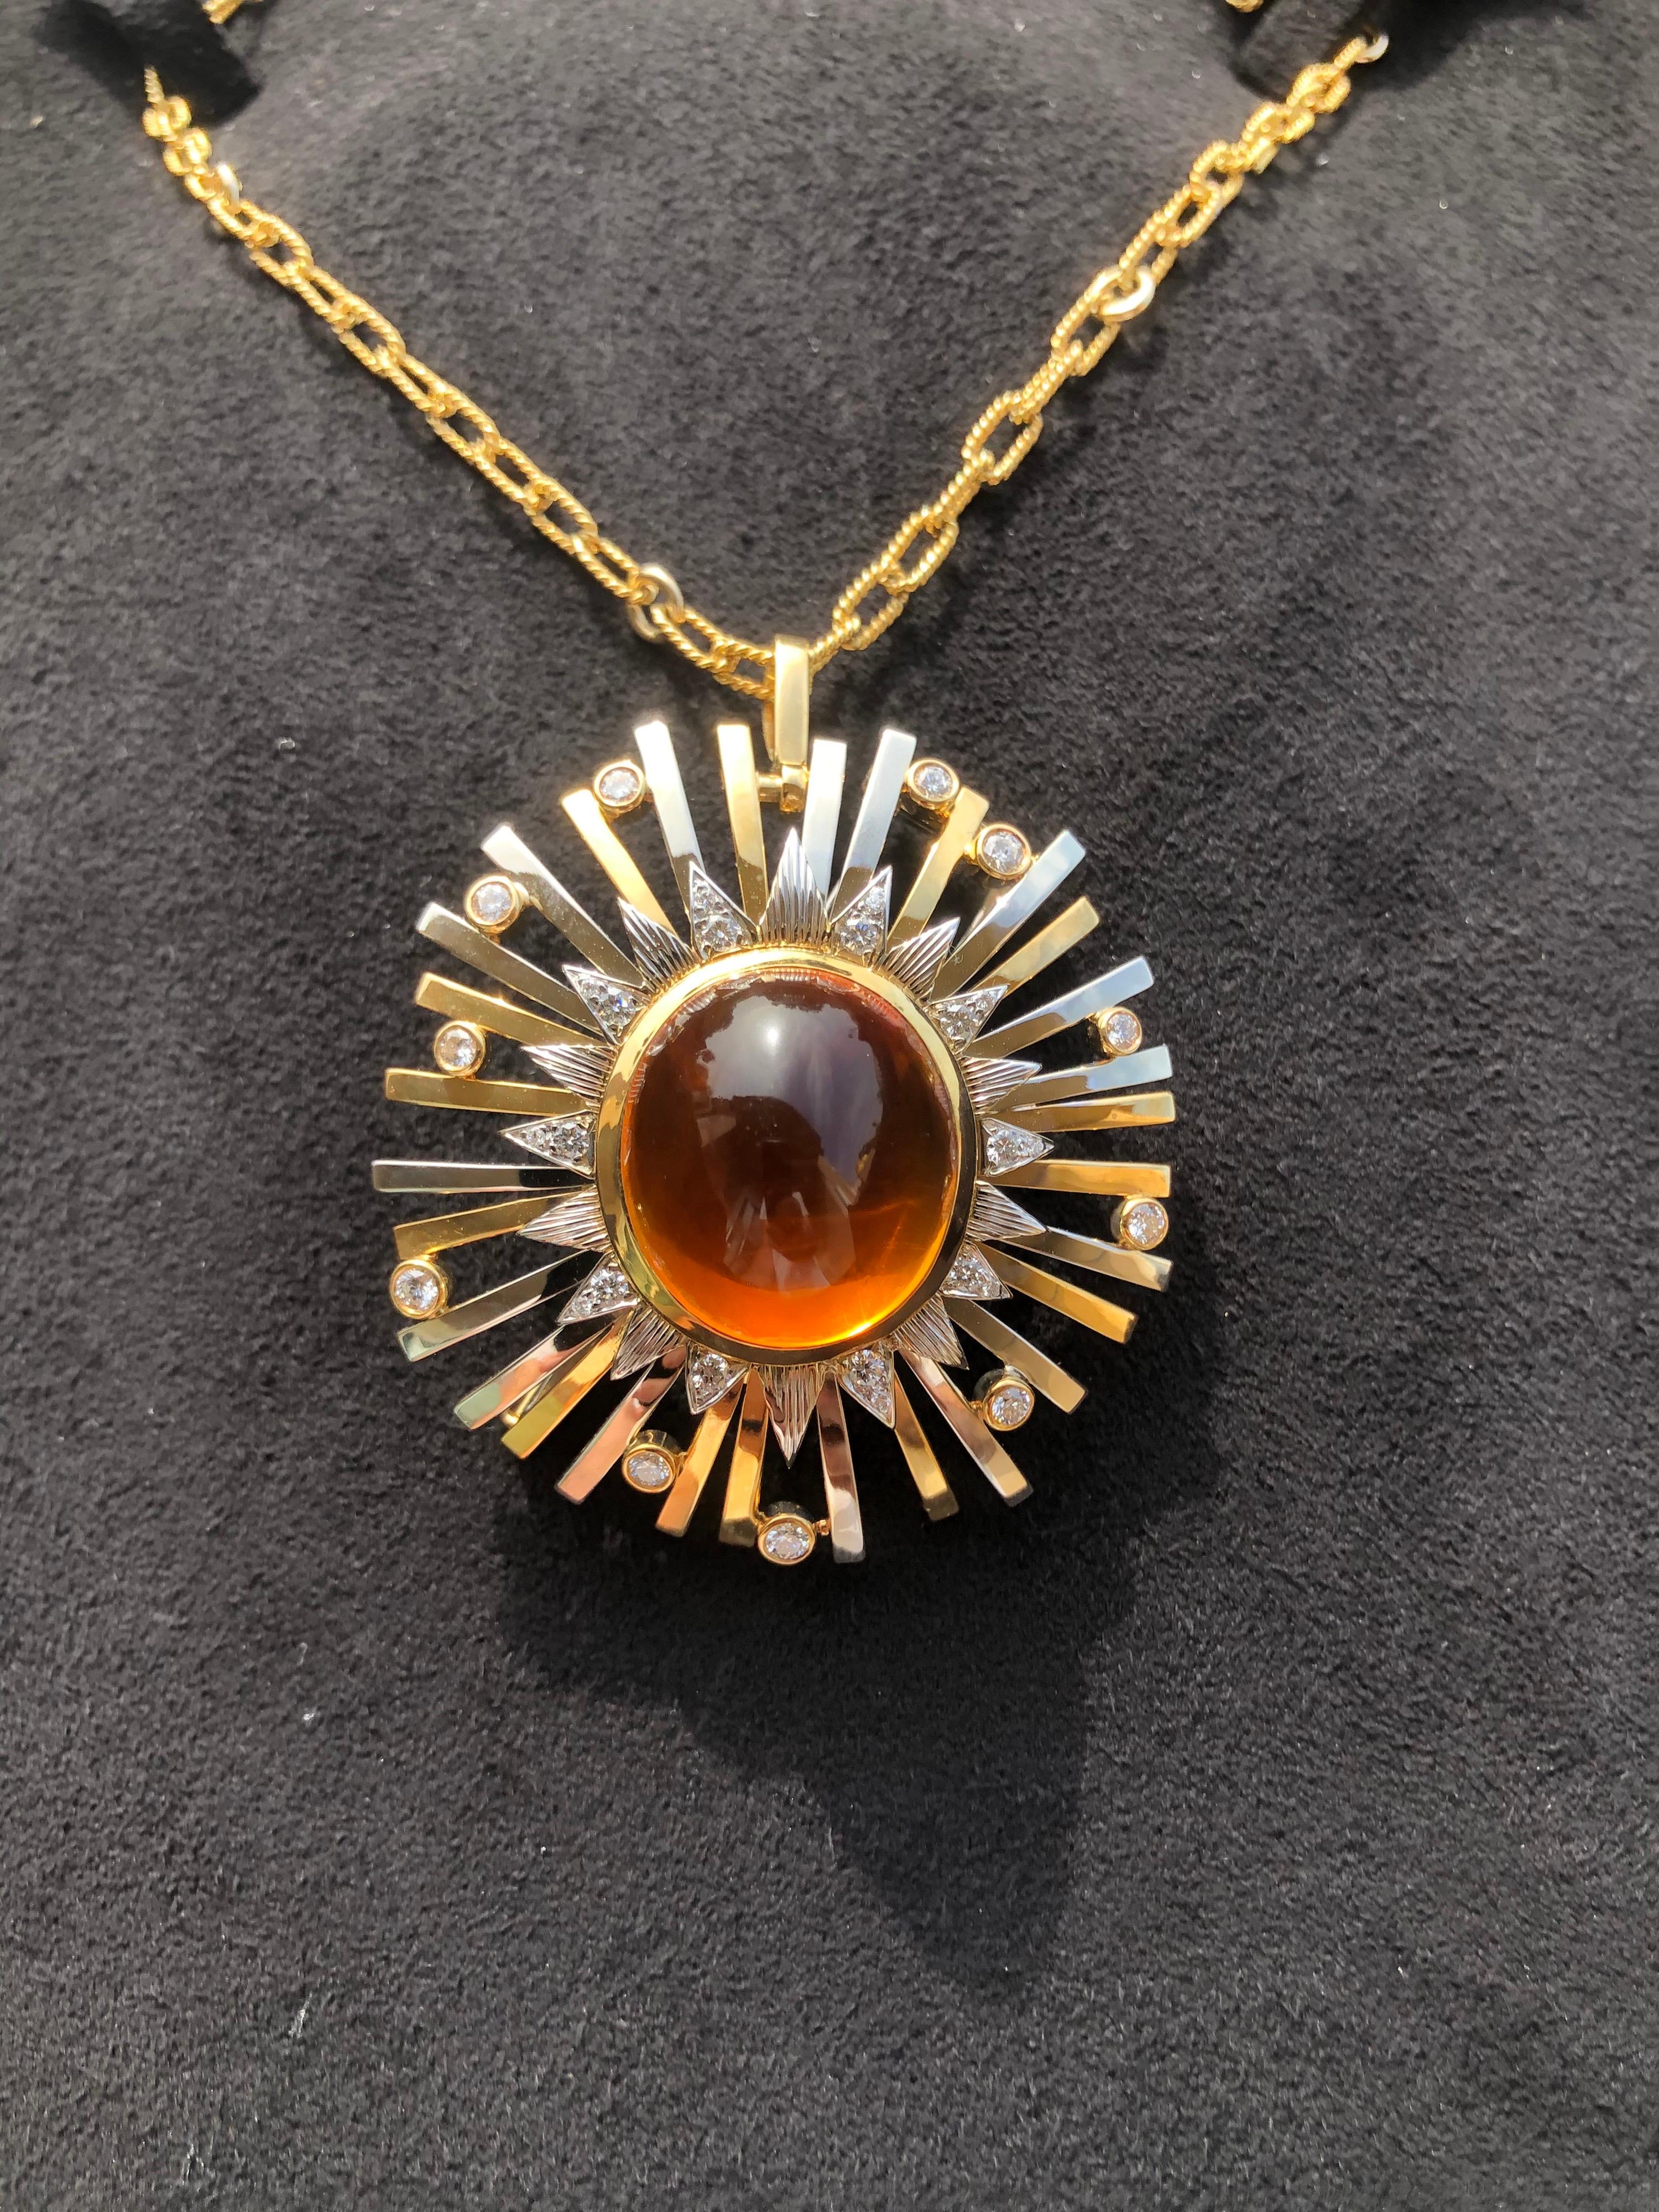 Madeira Citrine Pendant Necklace Brooch Cabochon 24.14 Carat  For Sale 13